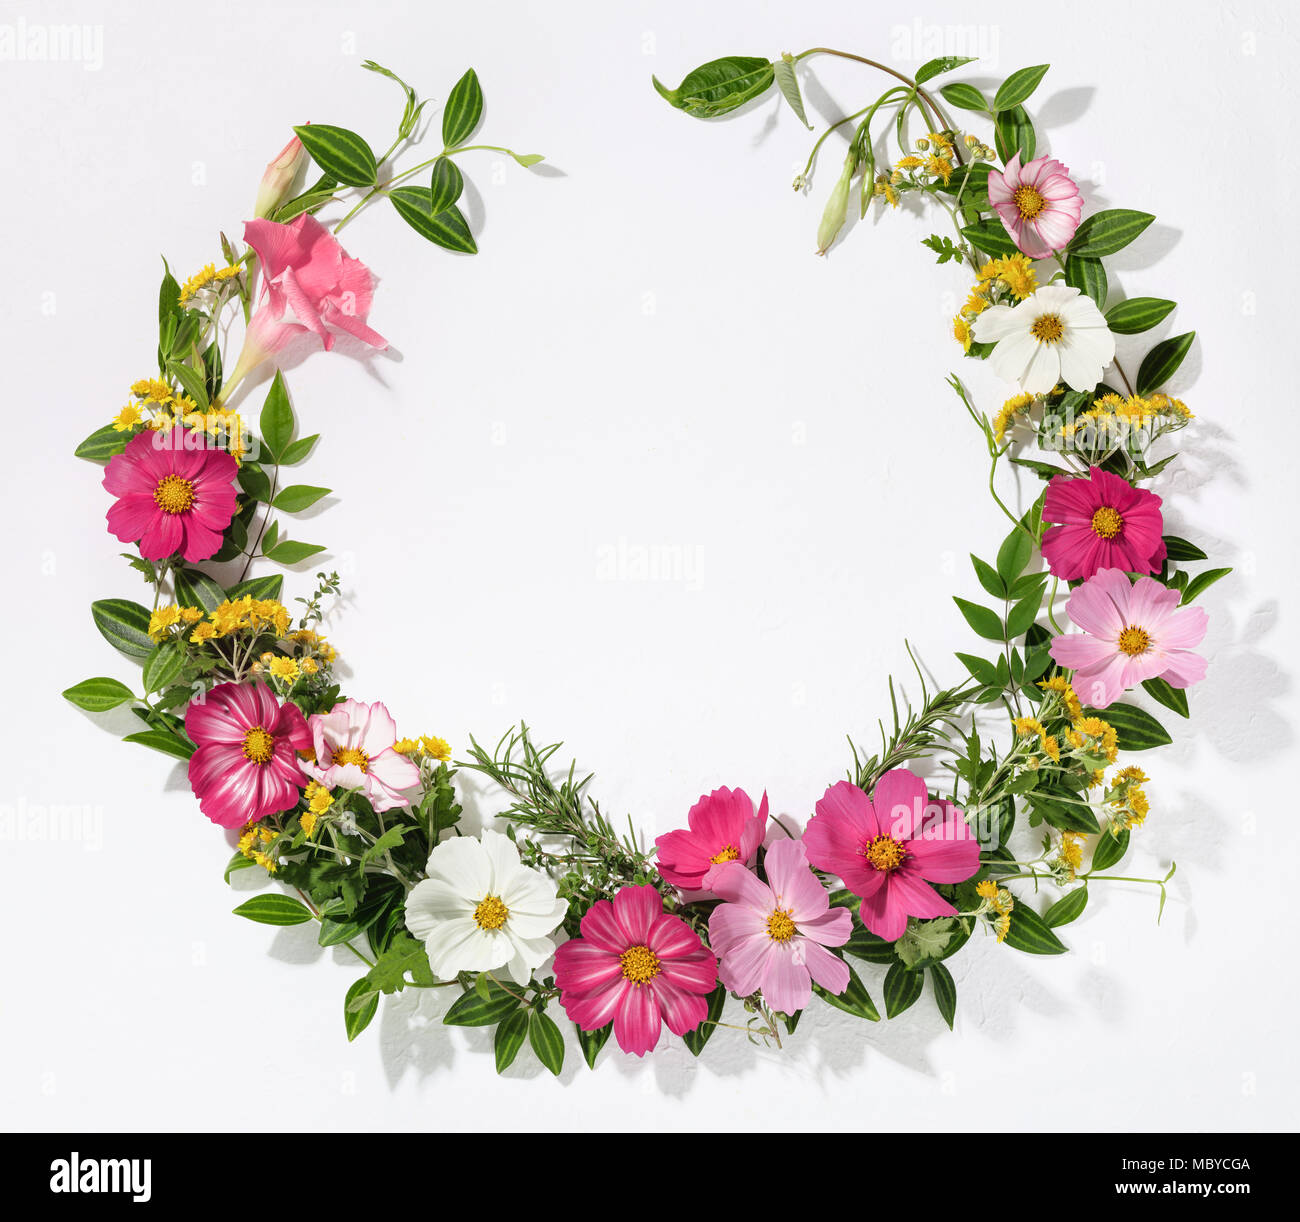 Wreath with galsang flower, leaves and petals Stock Photo